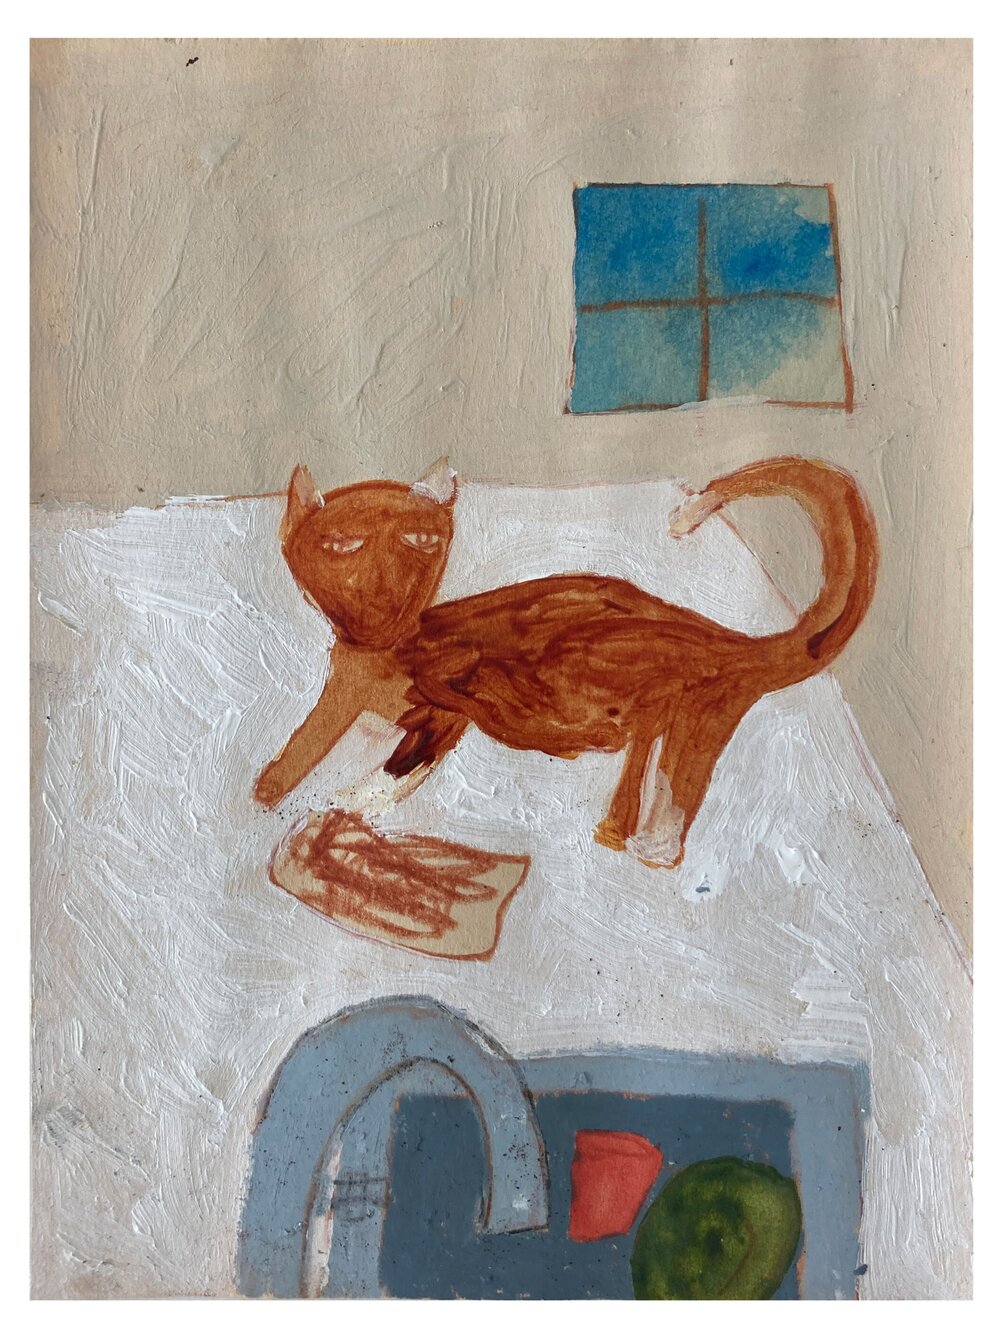 Marcus Leslie Singleton - Cat Washing DishesAcrylic, pencil & watercolor on paper4.5 x 6 in. (unframed)$1,200